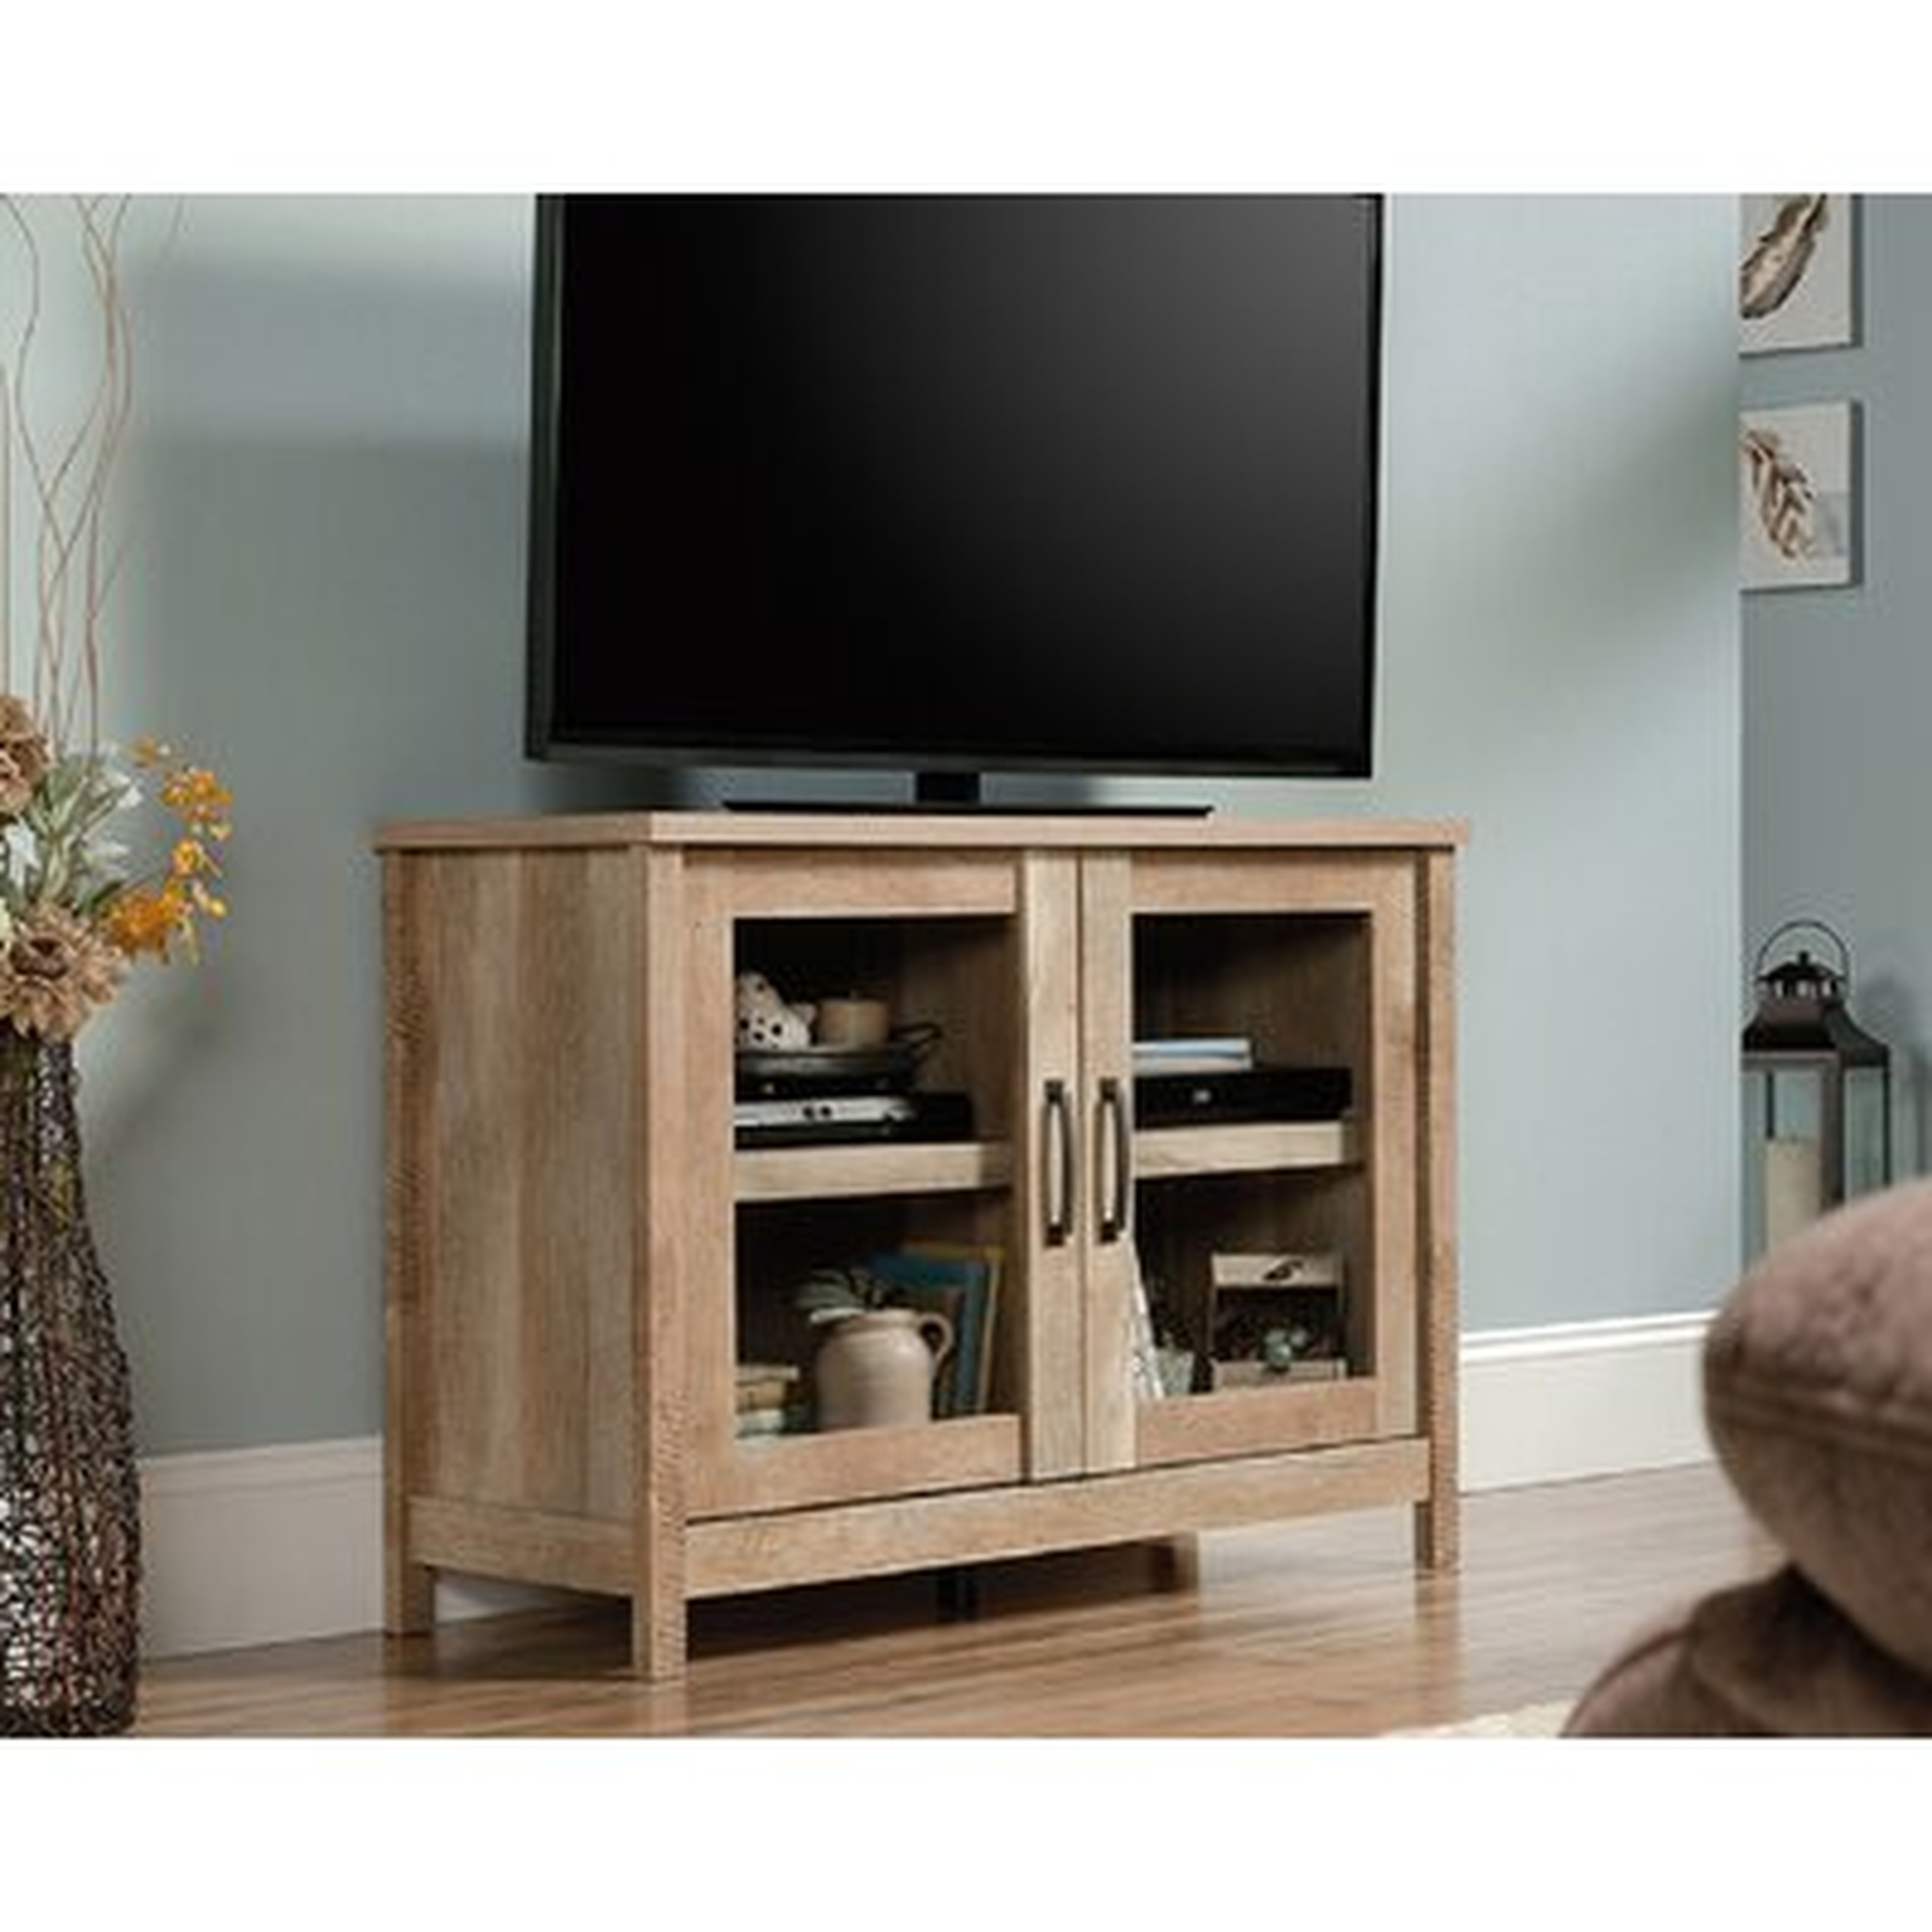 Canalou TV Stand for TVs up to 42 inches - Wayfair